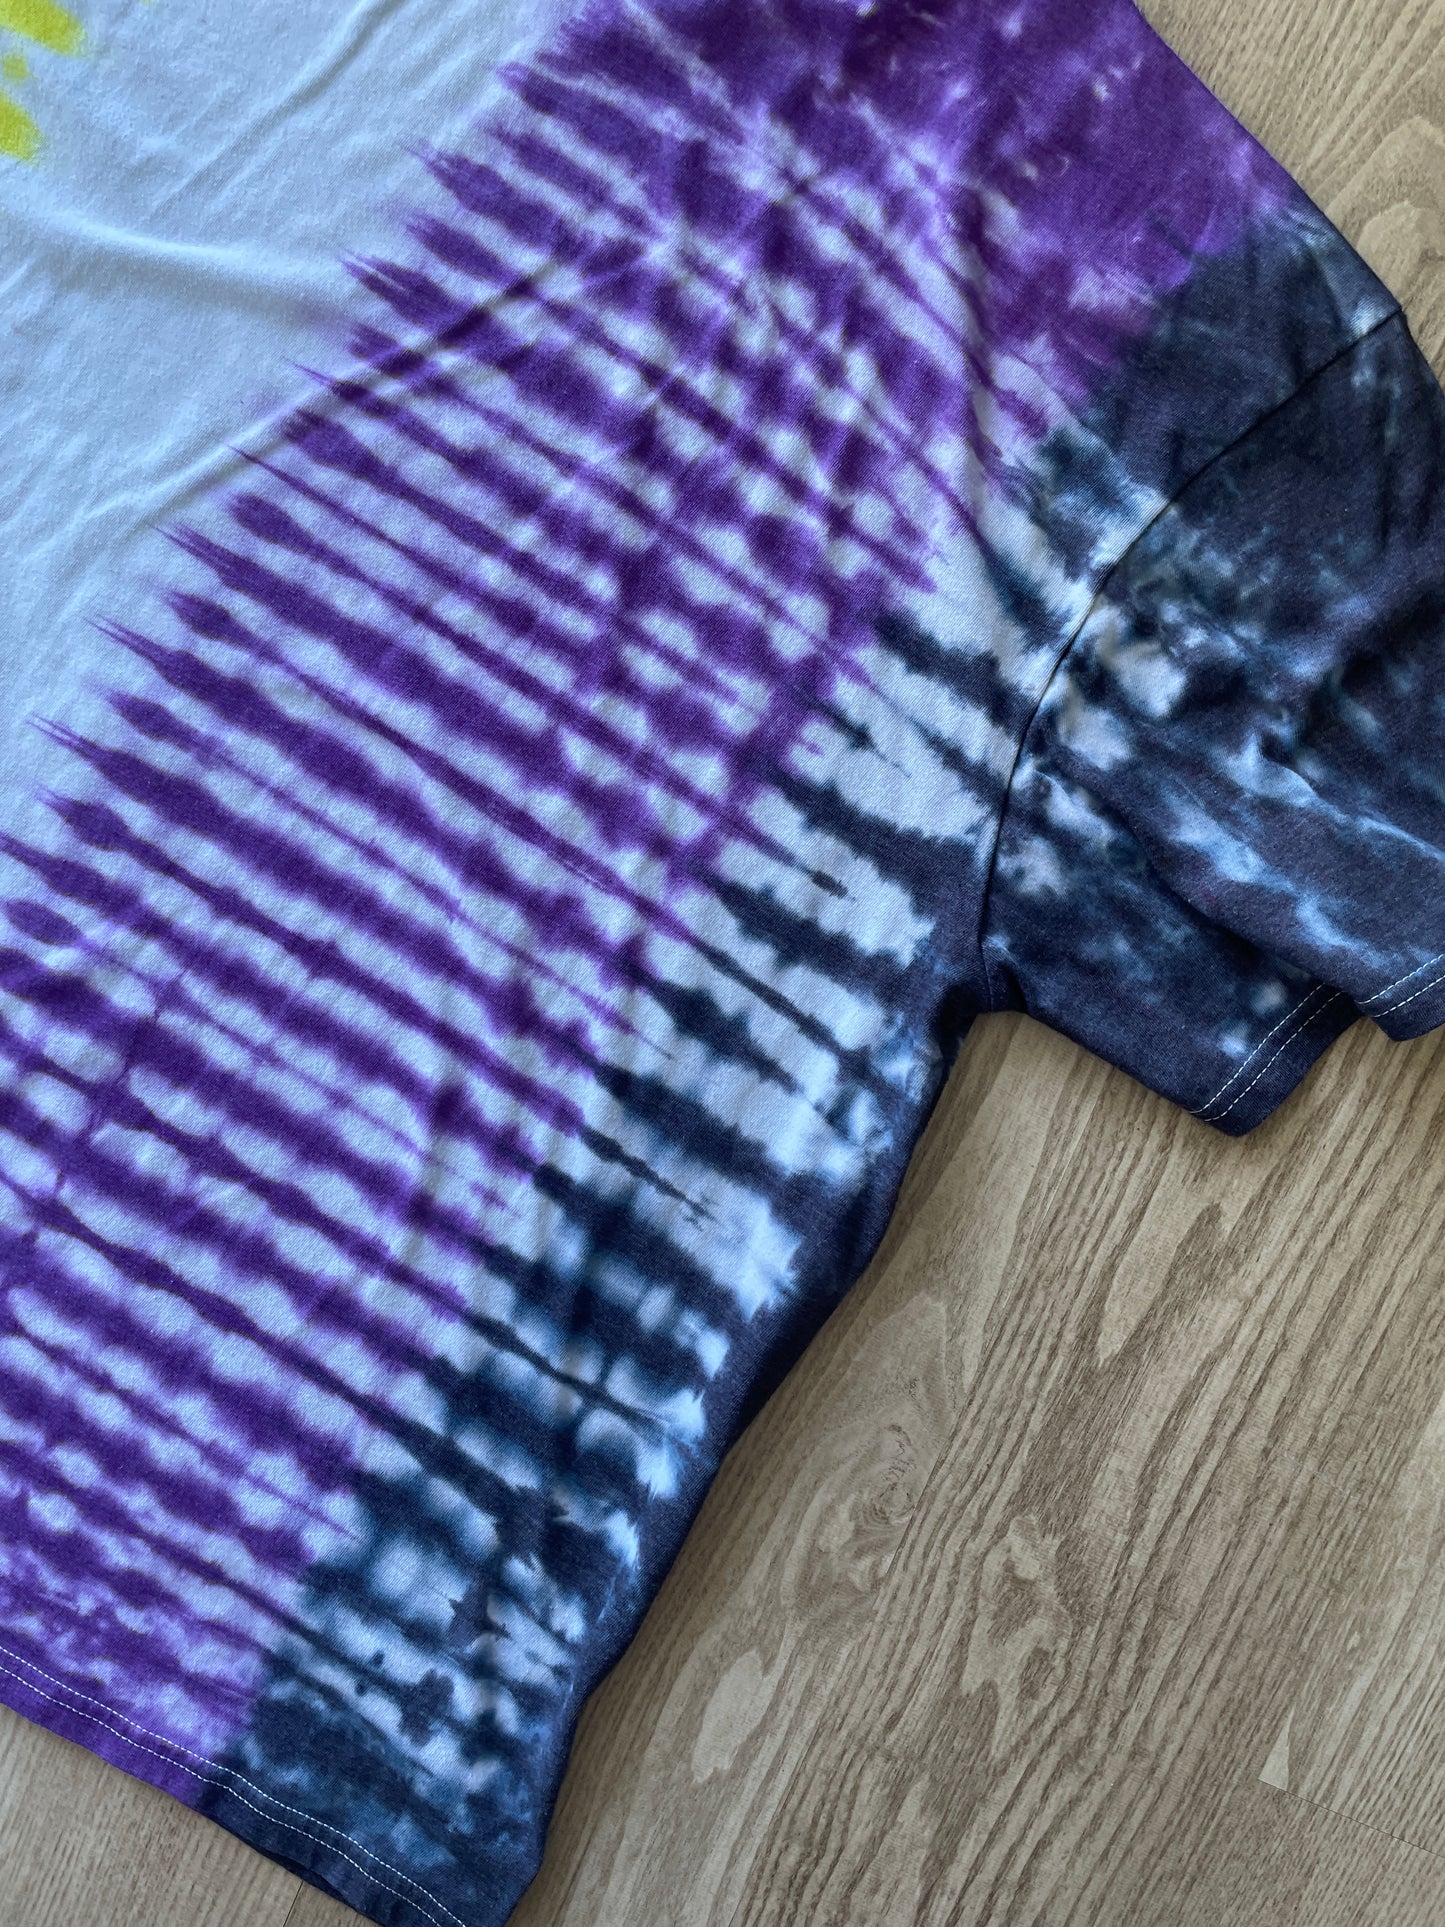 2XL Men’s Non-Binary Pride Flag-Inspired Handmade Tie Dye T-Shirt | One-Of-a-Kind White, Yellow, Purple, and Black Short Sleeve